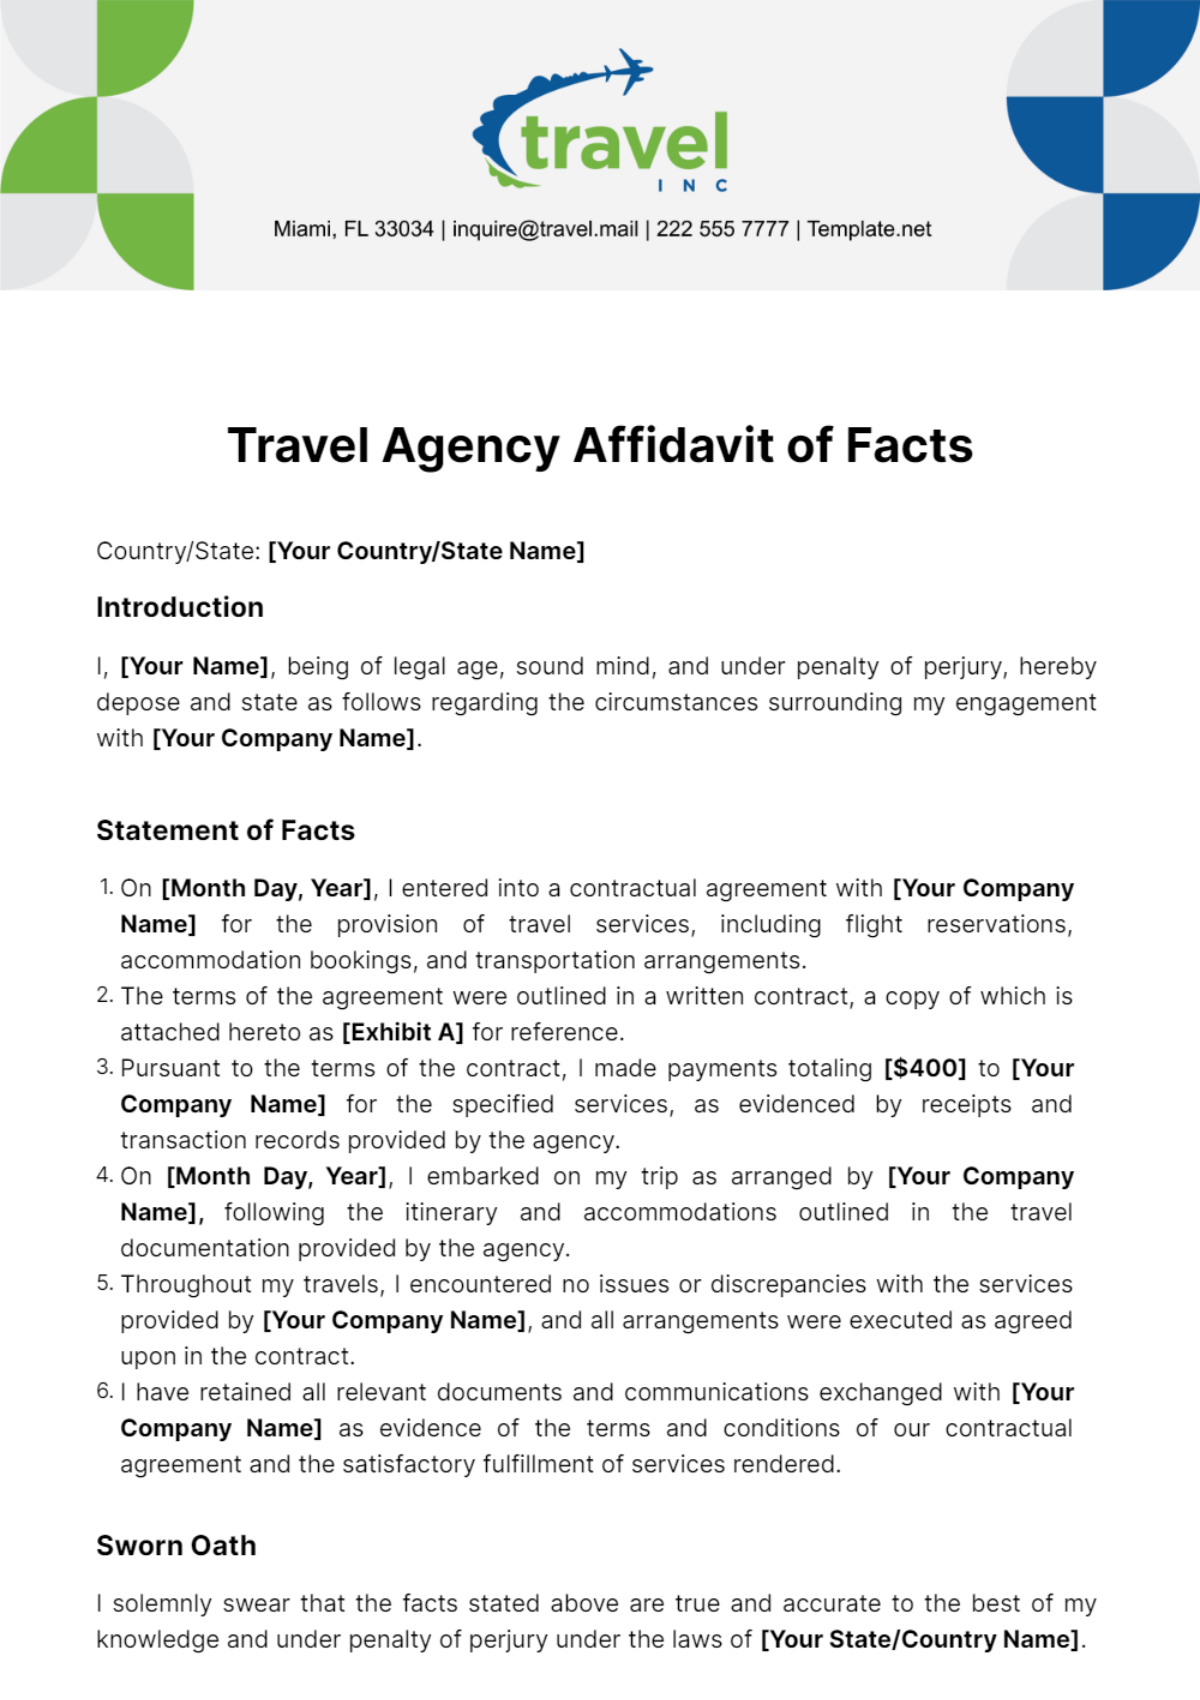 Free Travel Agency Affidavit of Facts Template